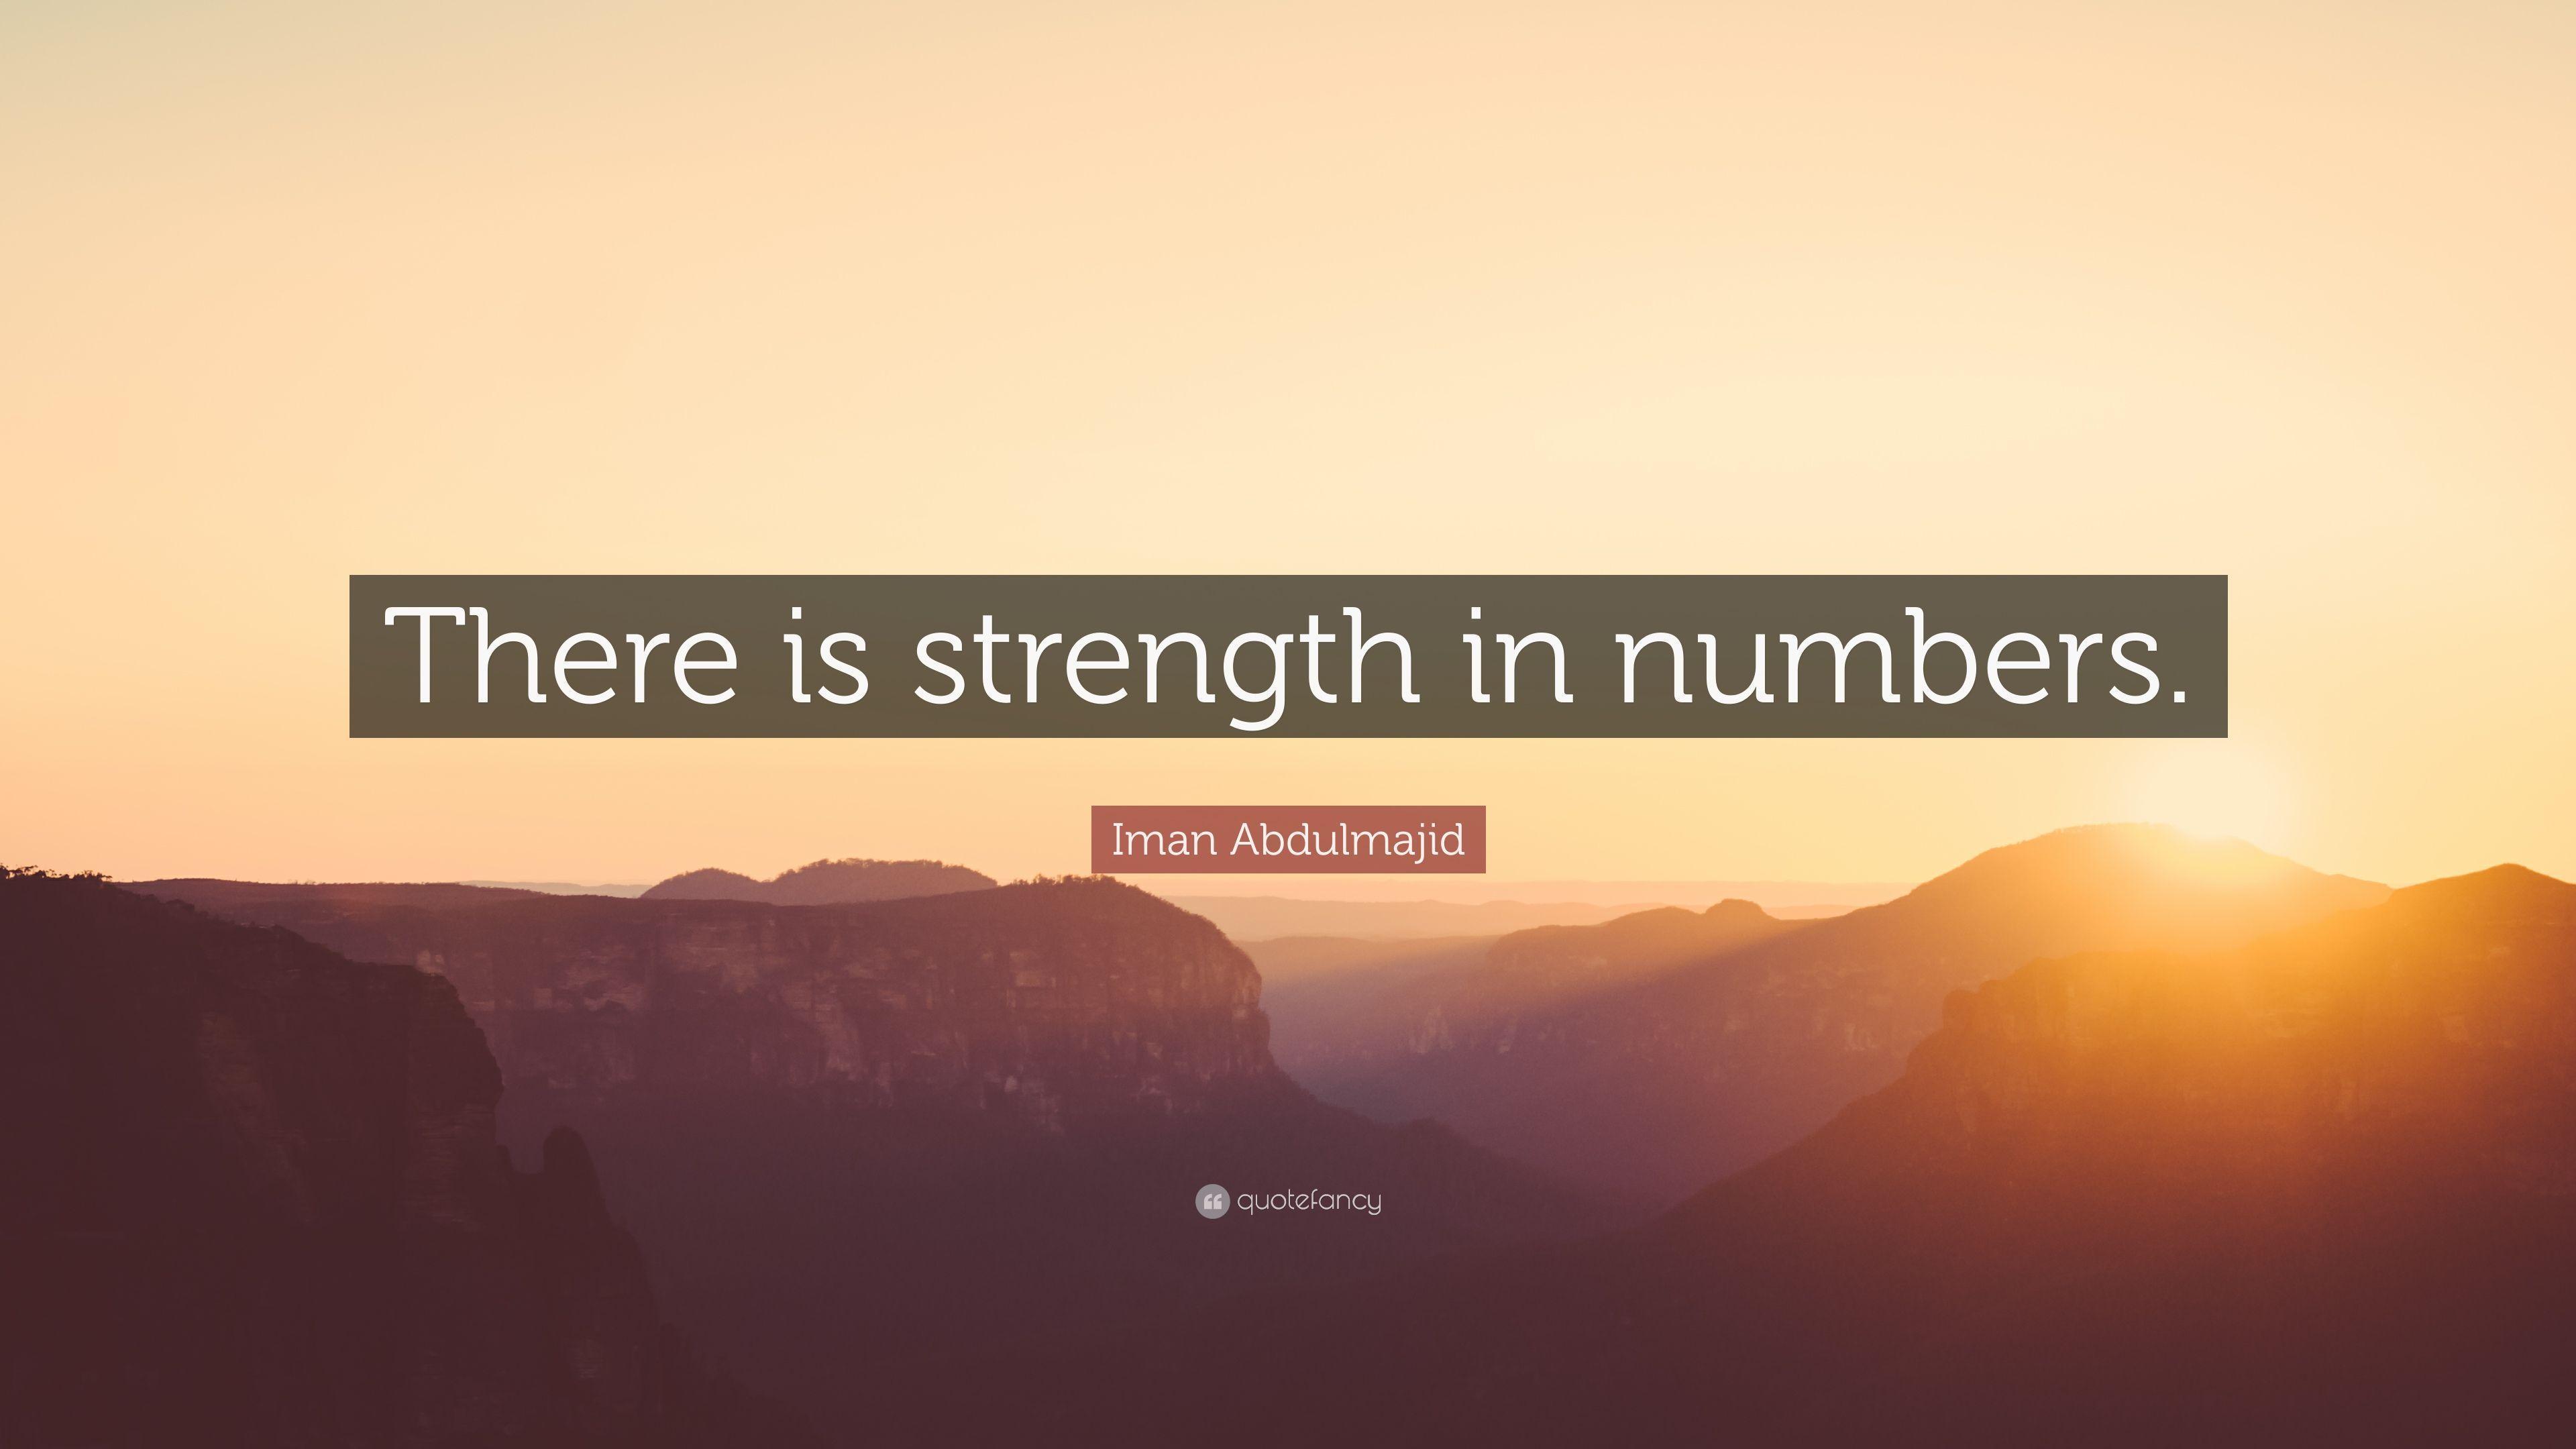 Iman Abdulmajid Quote: “There is strength in numbers.” 5